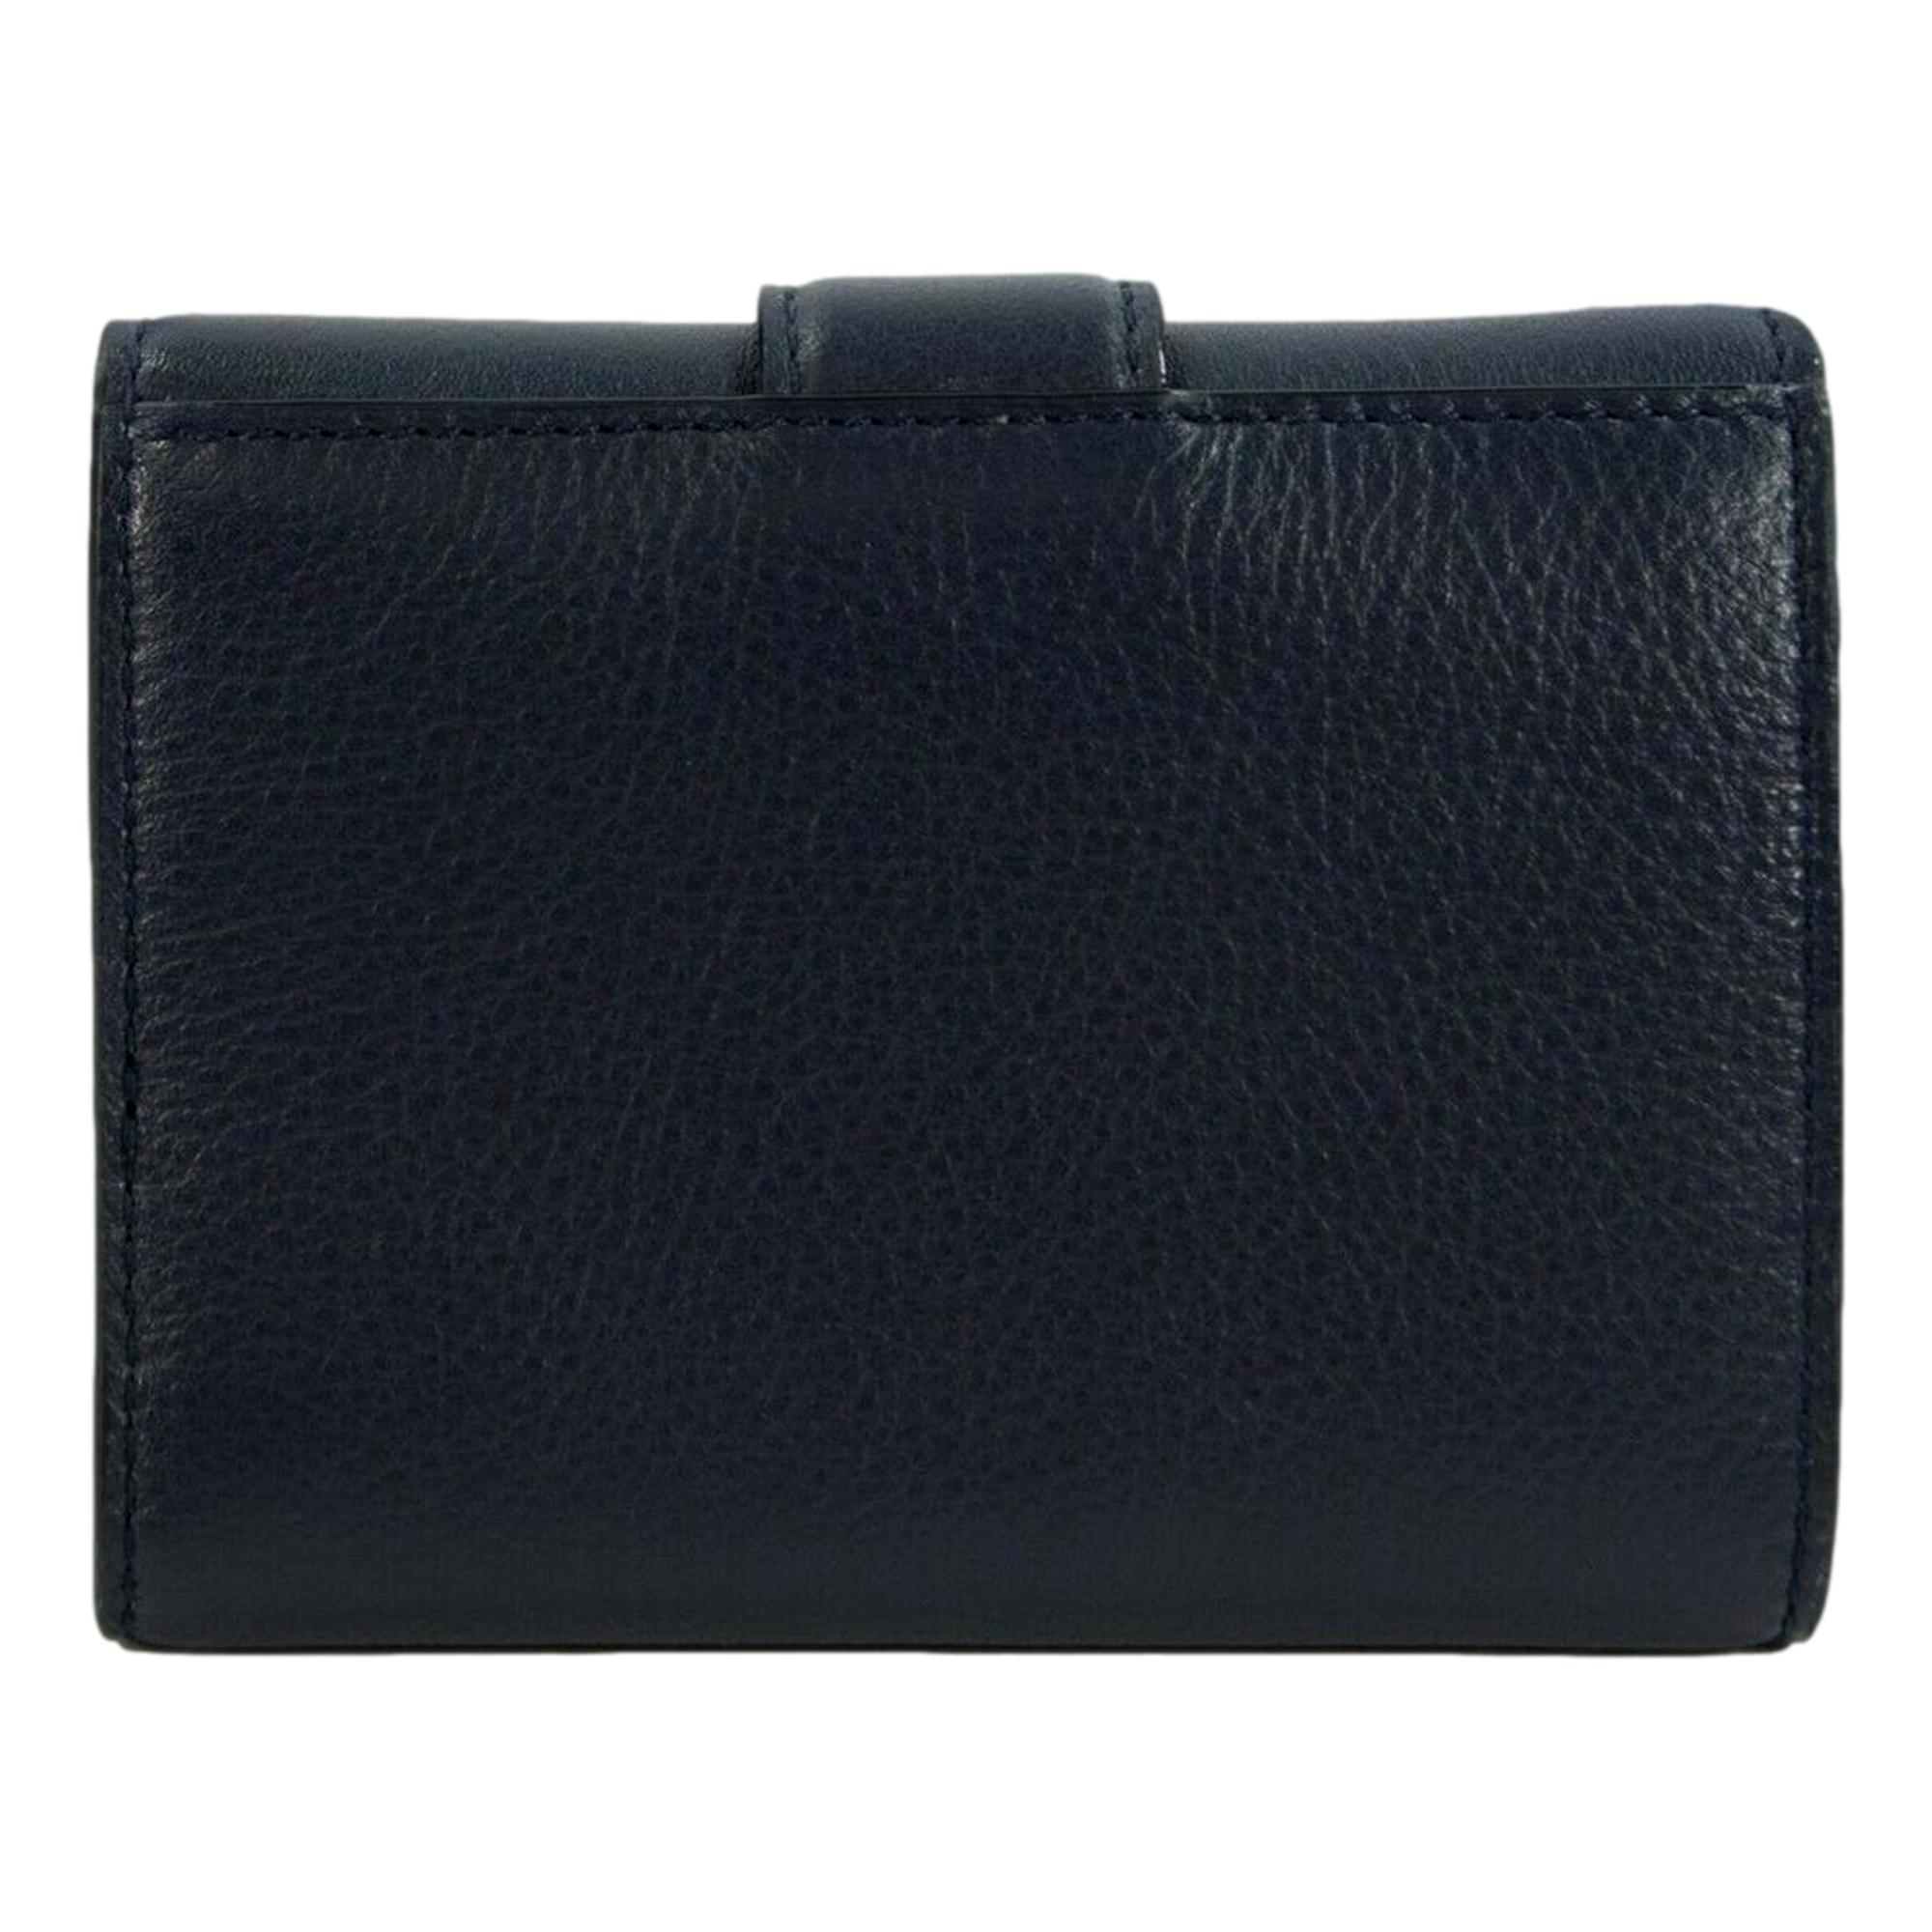 Jimmy Choo Cheri Dark Blue Leather Trifold Walllet 0SQM | 028 at_Queen_Bee_of_Beverly_Hills